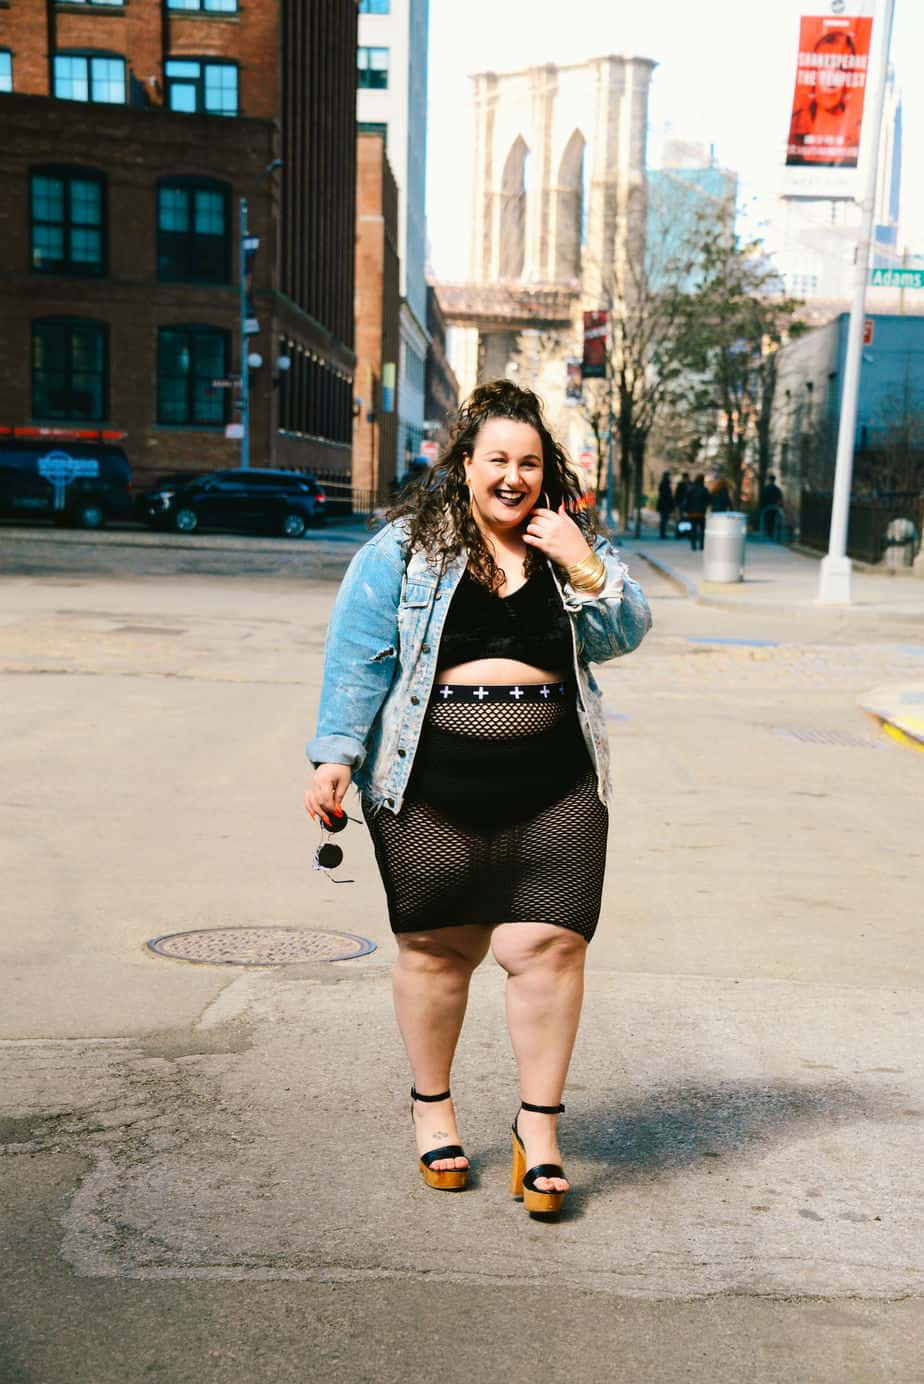 Fat Girl Aesthetics with Chubby Cartwheels & Fat Leopard Photography